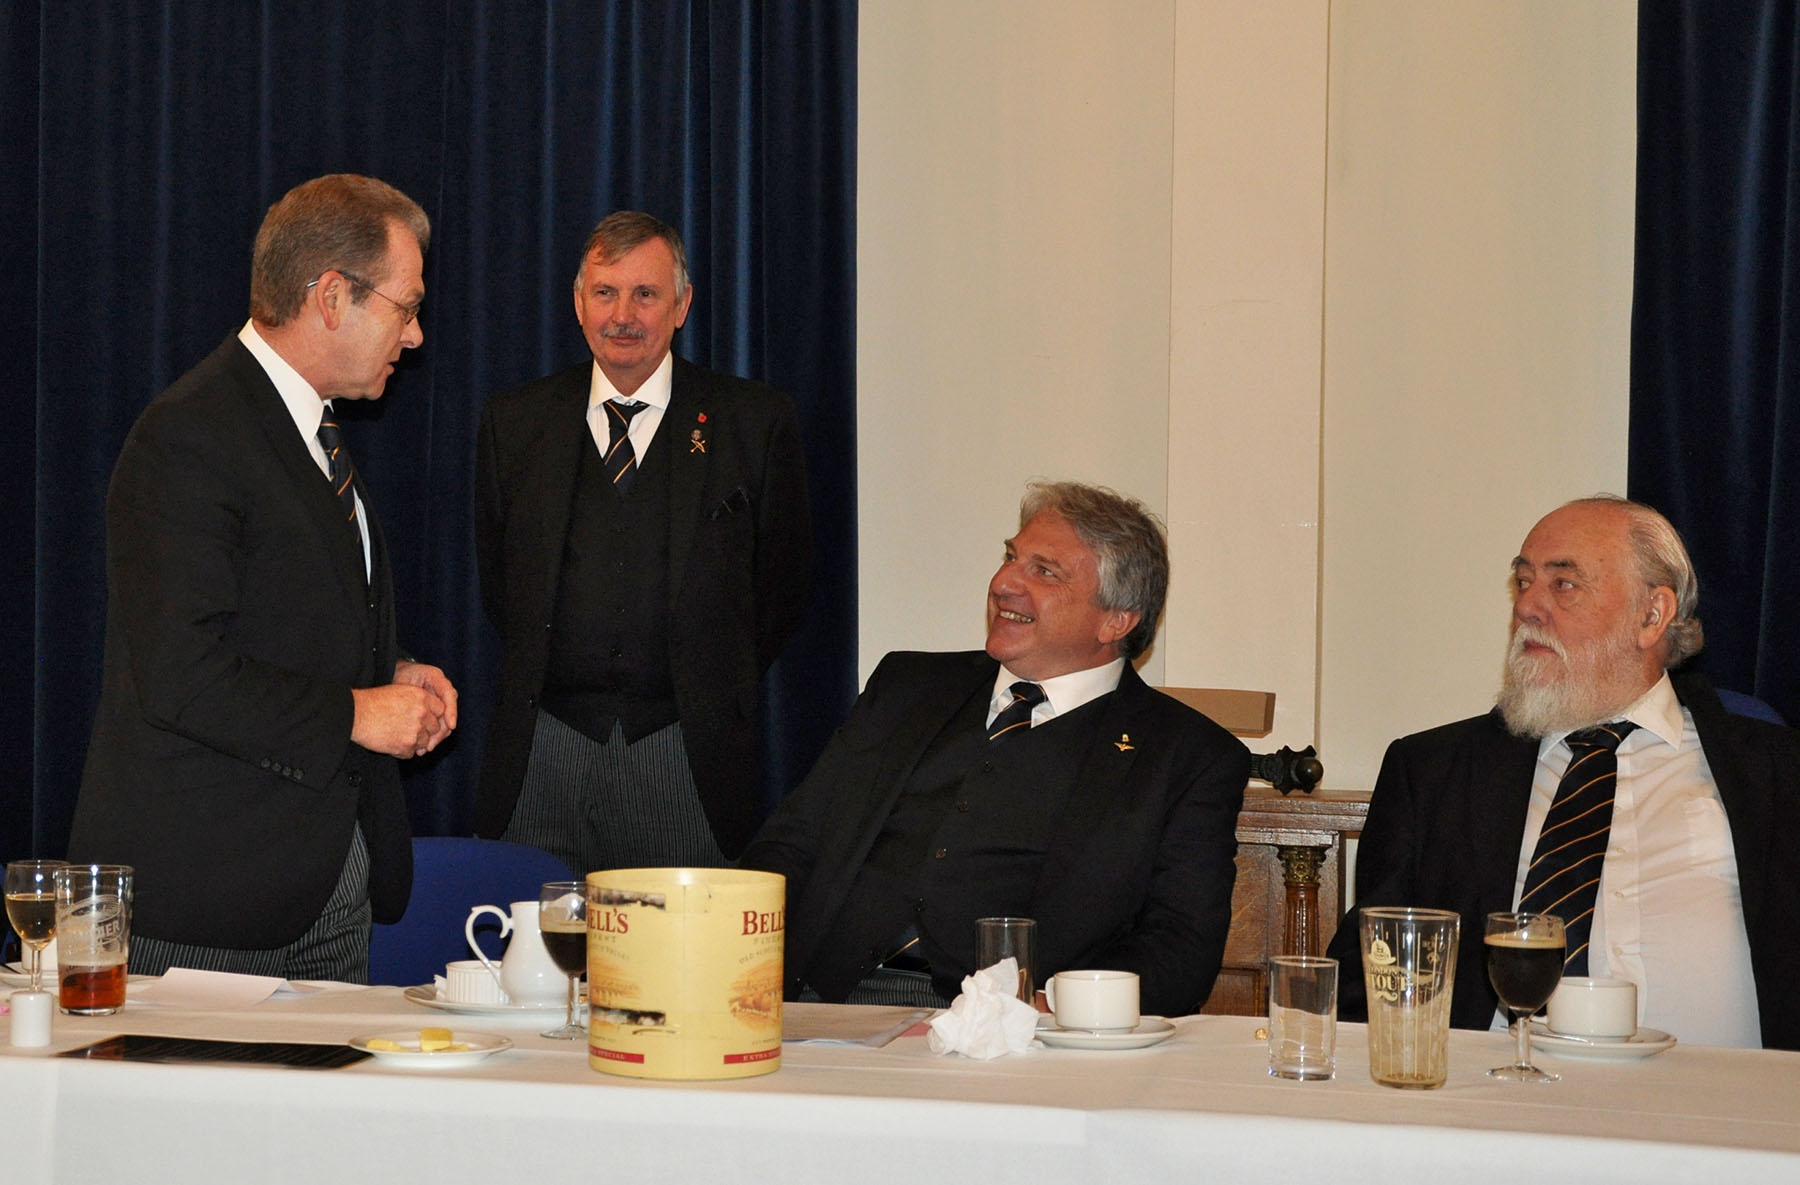 The Provincial Grand Supreme Ruler’s Visit to Warlingham Conclave